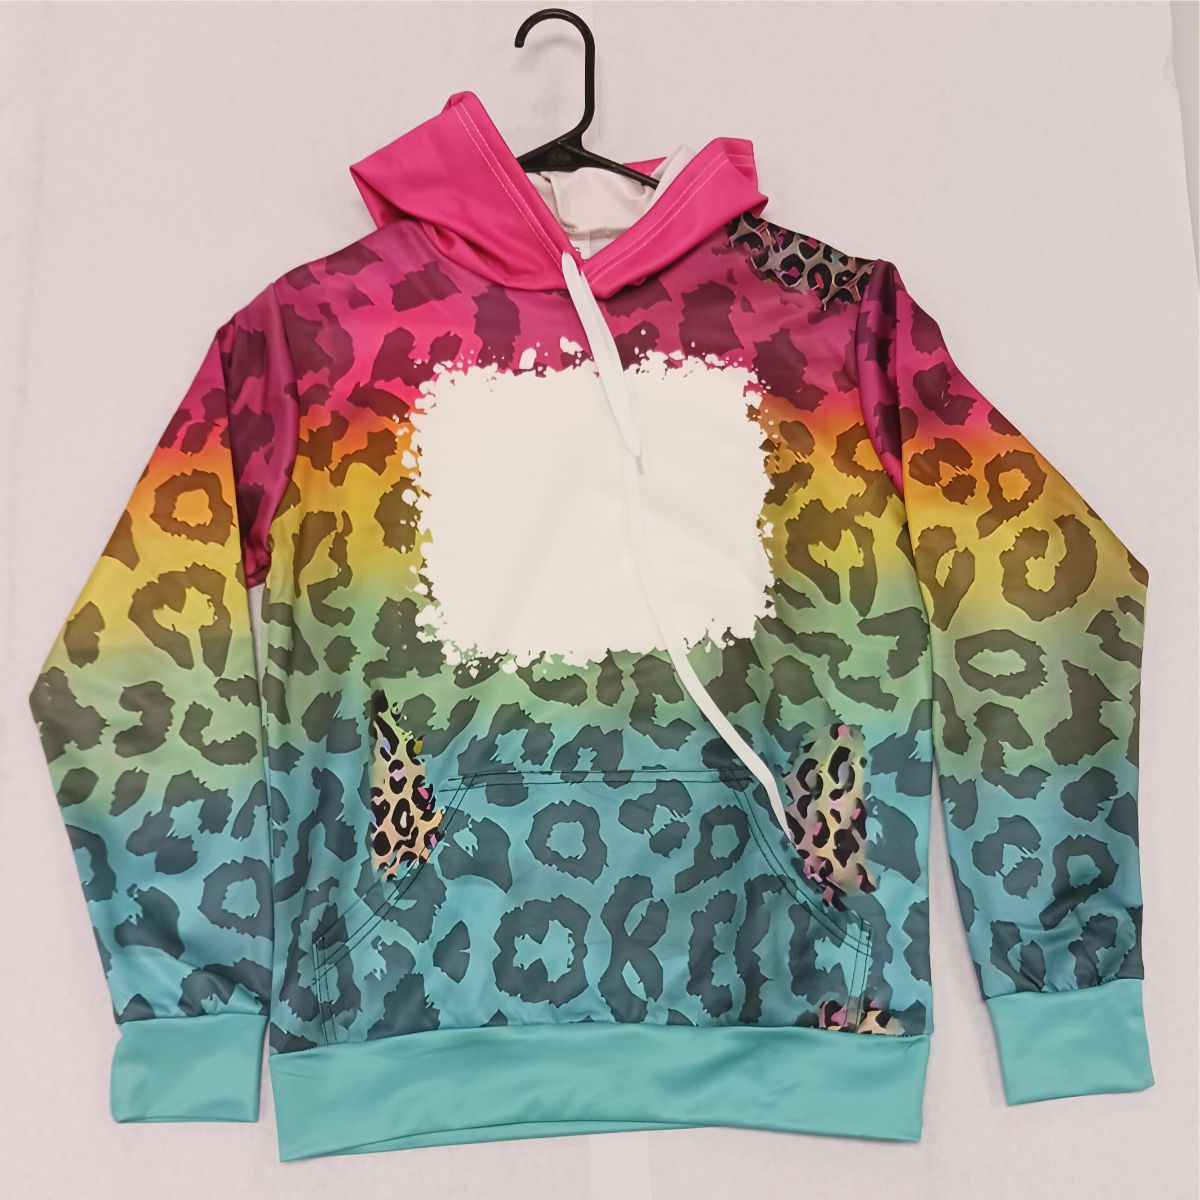 Discount Hoodie Adult Size 7 (Multiple Color Choices) CLEARANCE